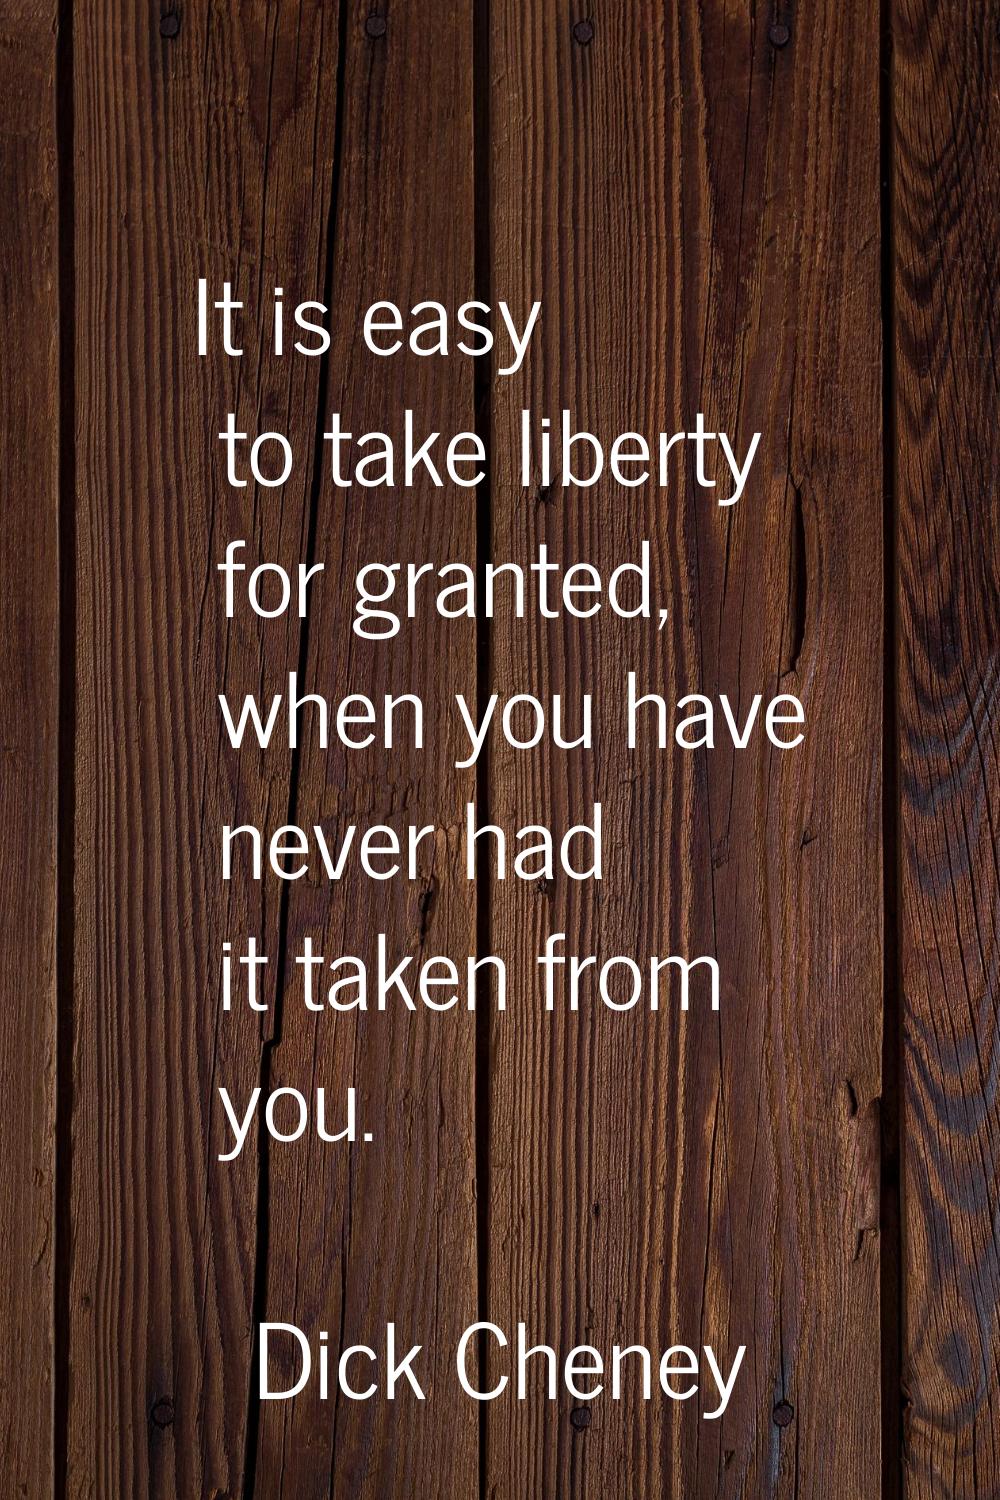 It is easy to take liberty for granted, when you have never had it taken from you.